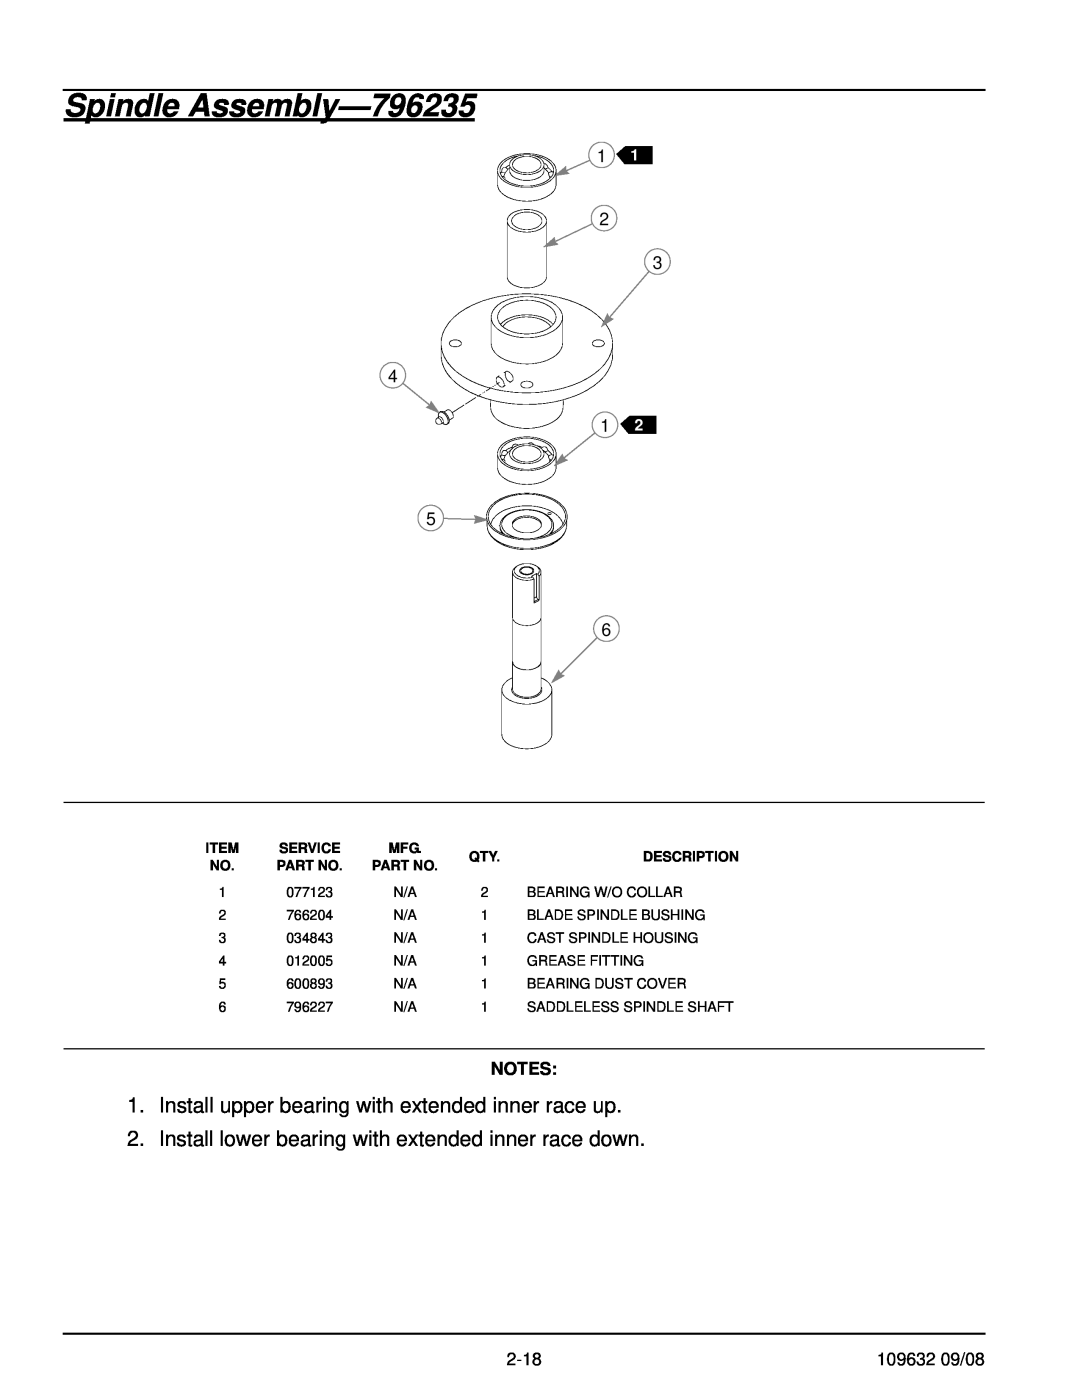 Hustler Turf 928739 manual Spindle Assembly-796235, Install upper bearing with extended inner race up, Service, Description 